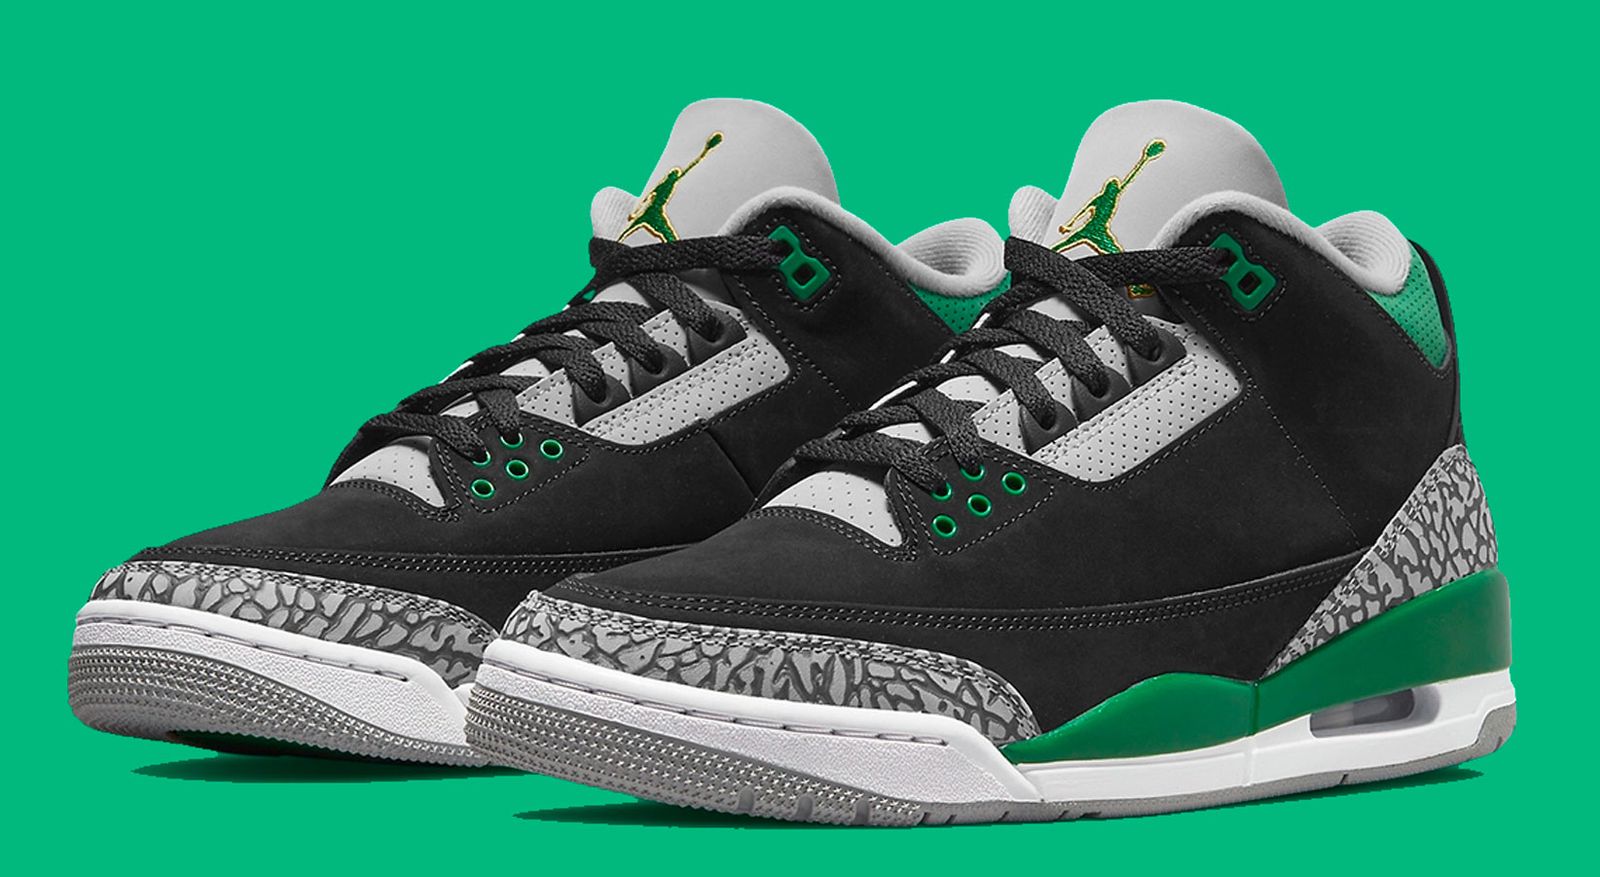 Best Air Jordan 3 colorways "Pine Green" product image of a pair of black sneakers with green details and grey underlays.